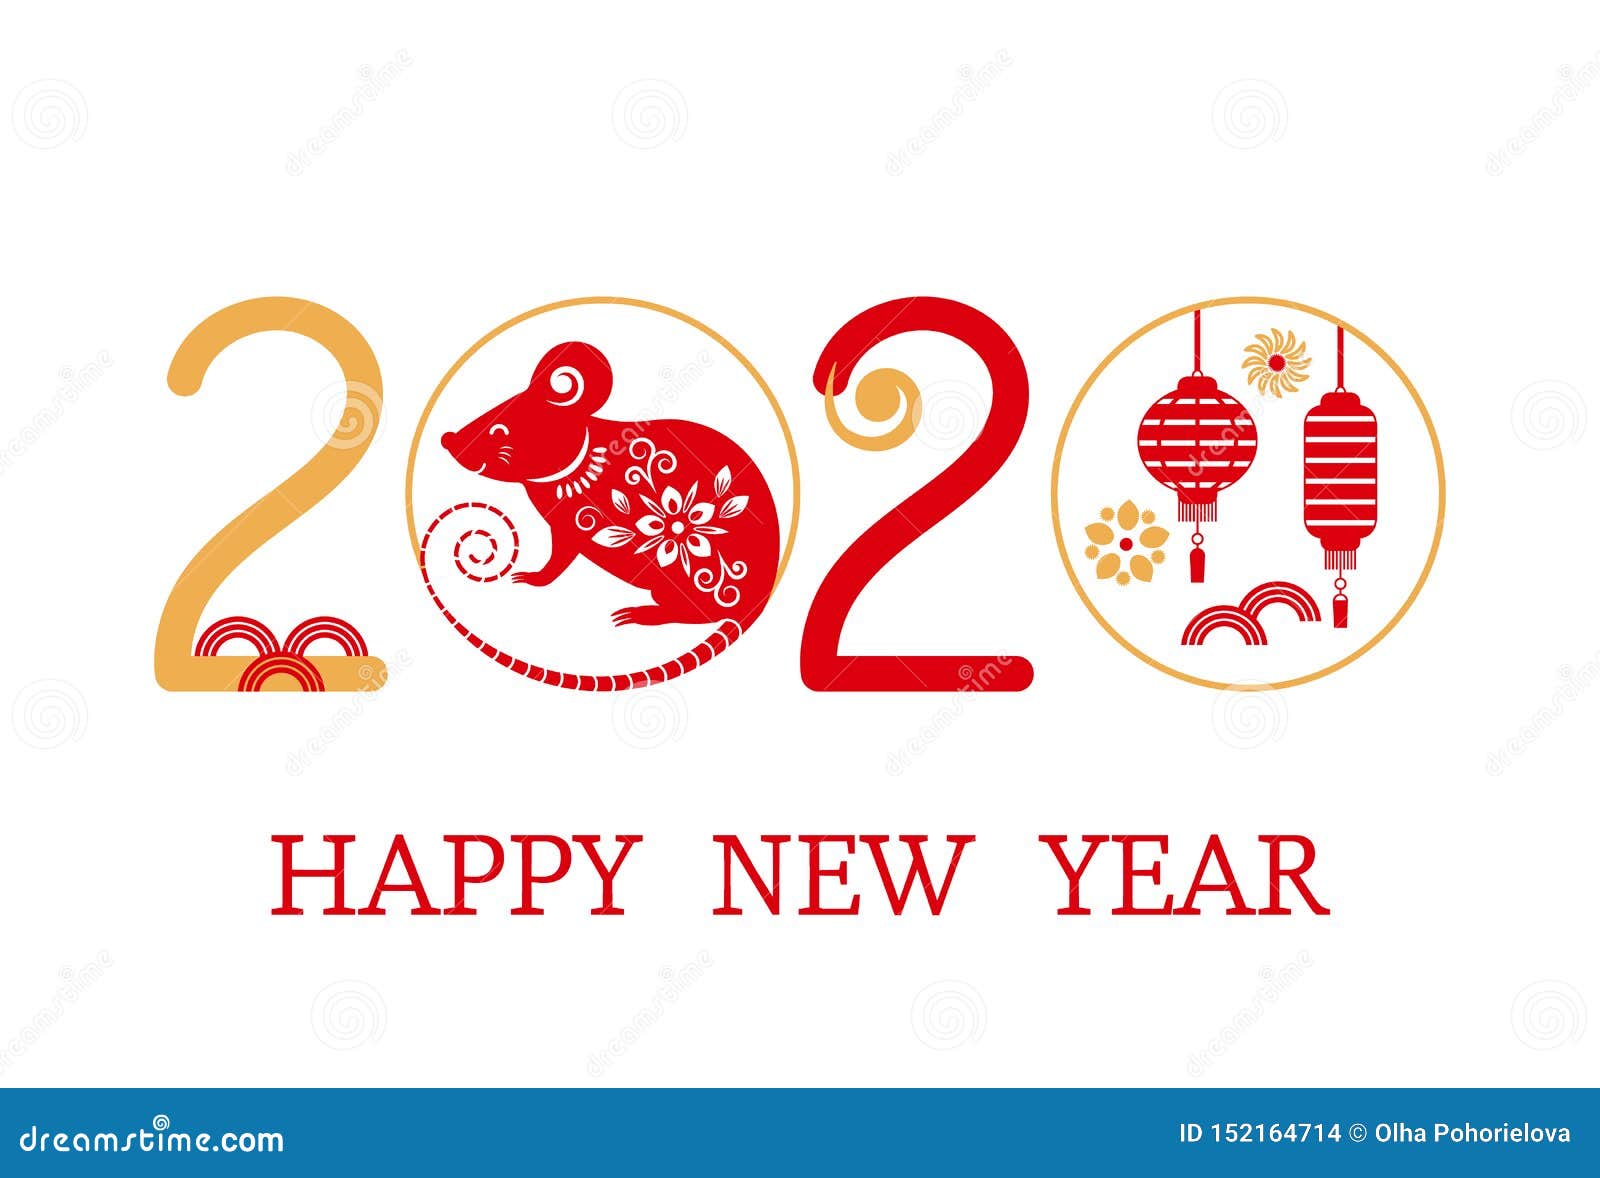 Postcard With The Chinese New Year 2020 Rat On The Astrological Calendar. Flat ...1600 x 1177